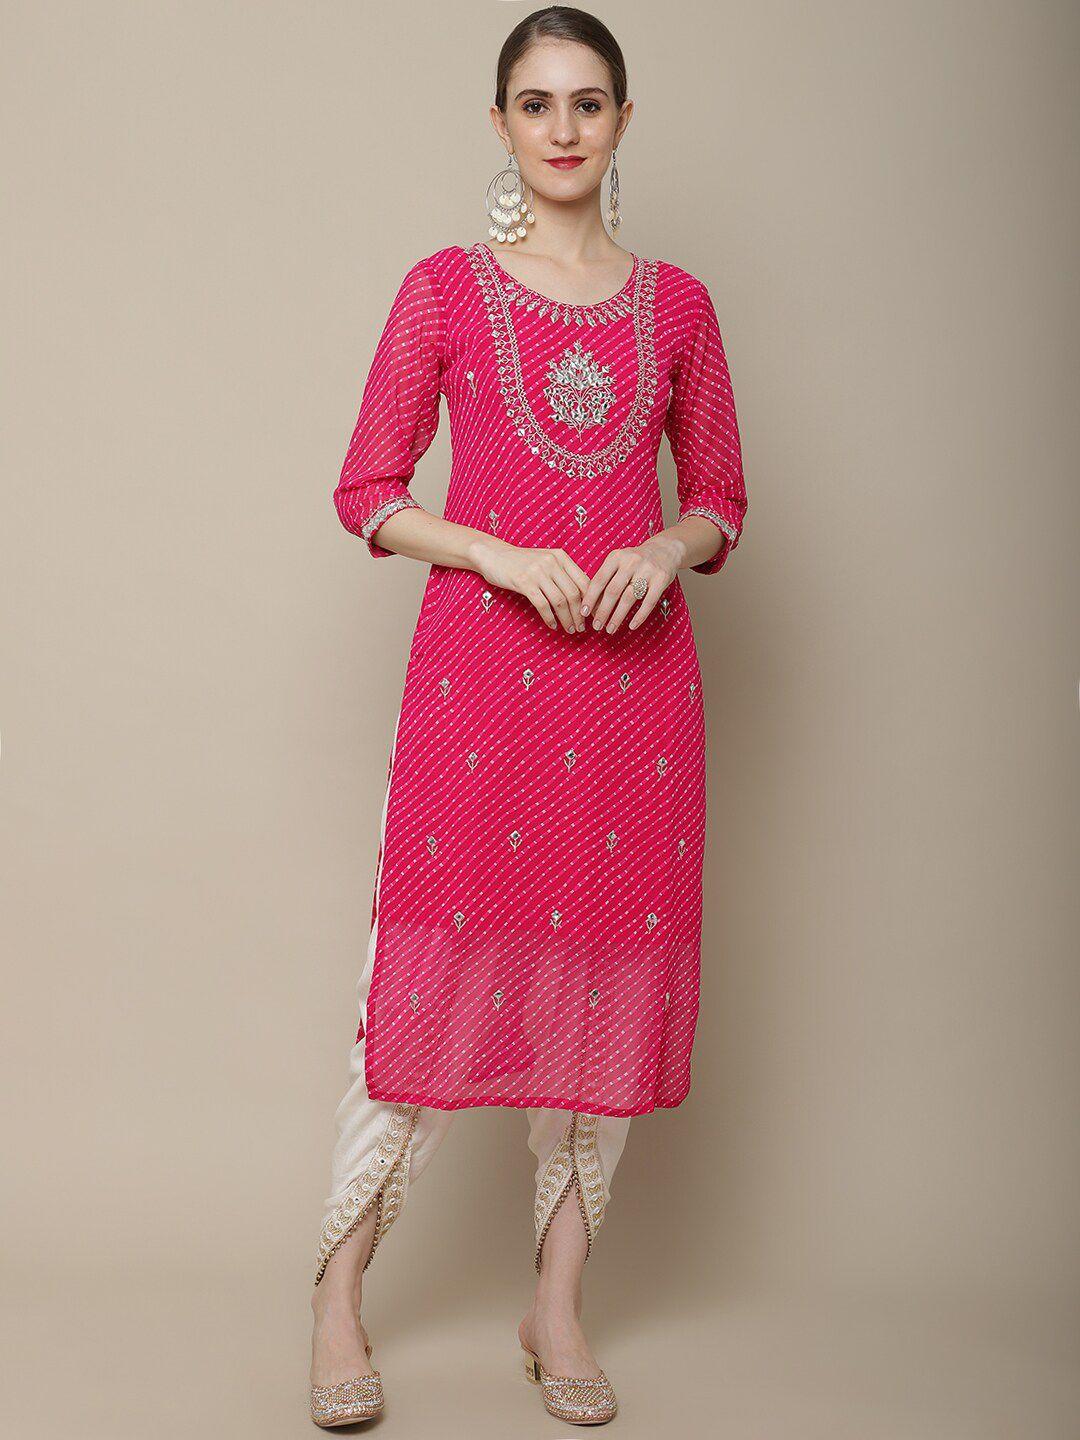 sangria-women-pink-floral-embroidered-georgette-straight-kurta